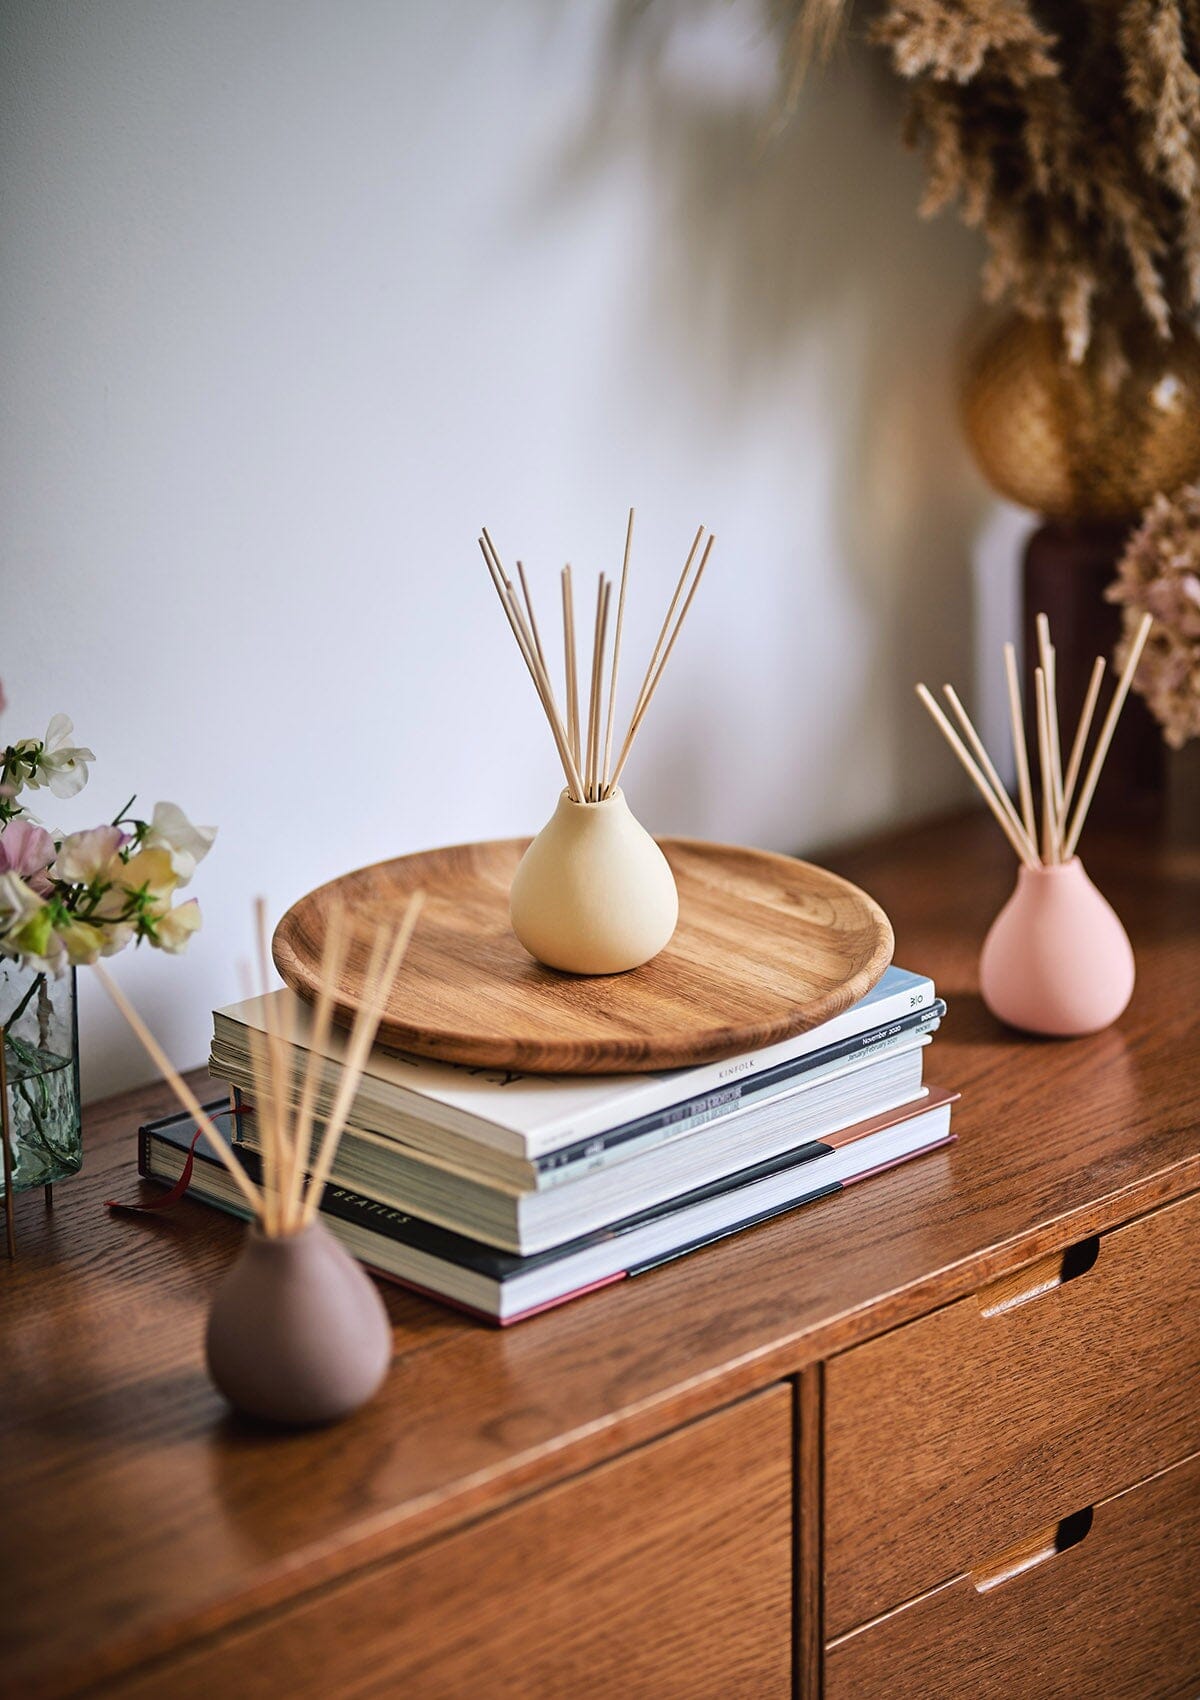 Peach Aztec Tuberose diffuser by Aery displayed on wooden draws with books and flowers